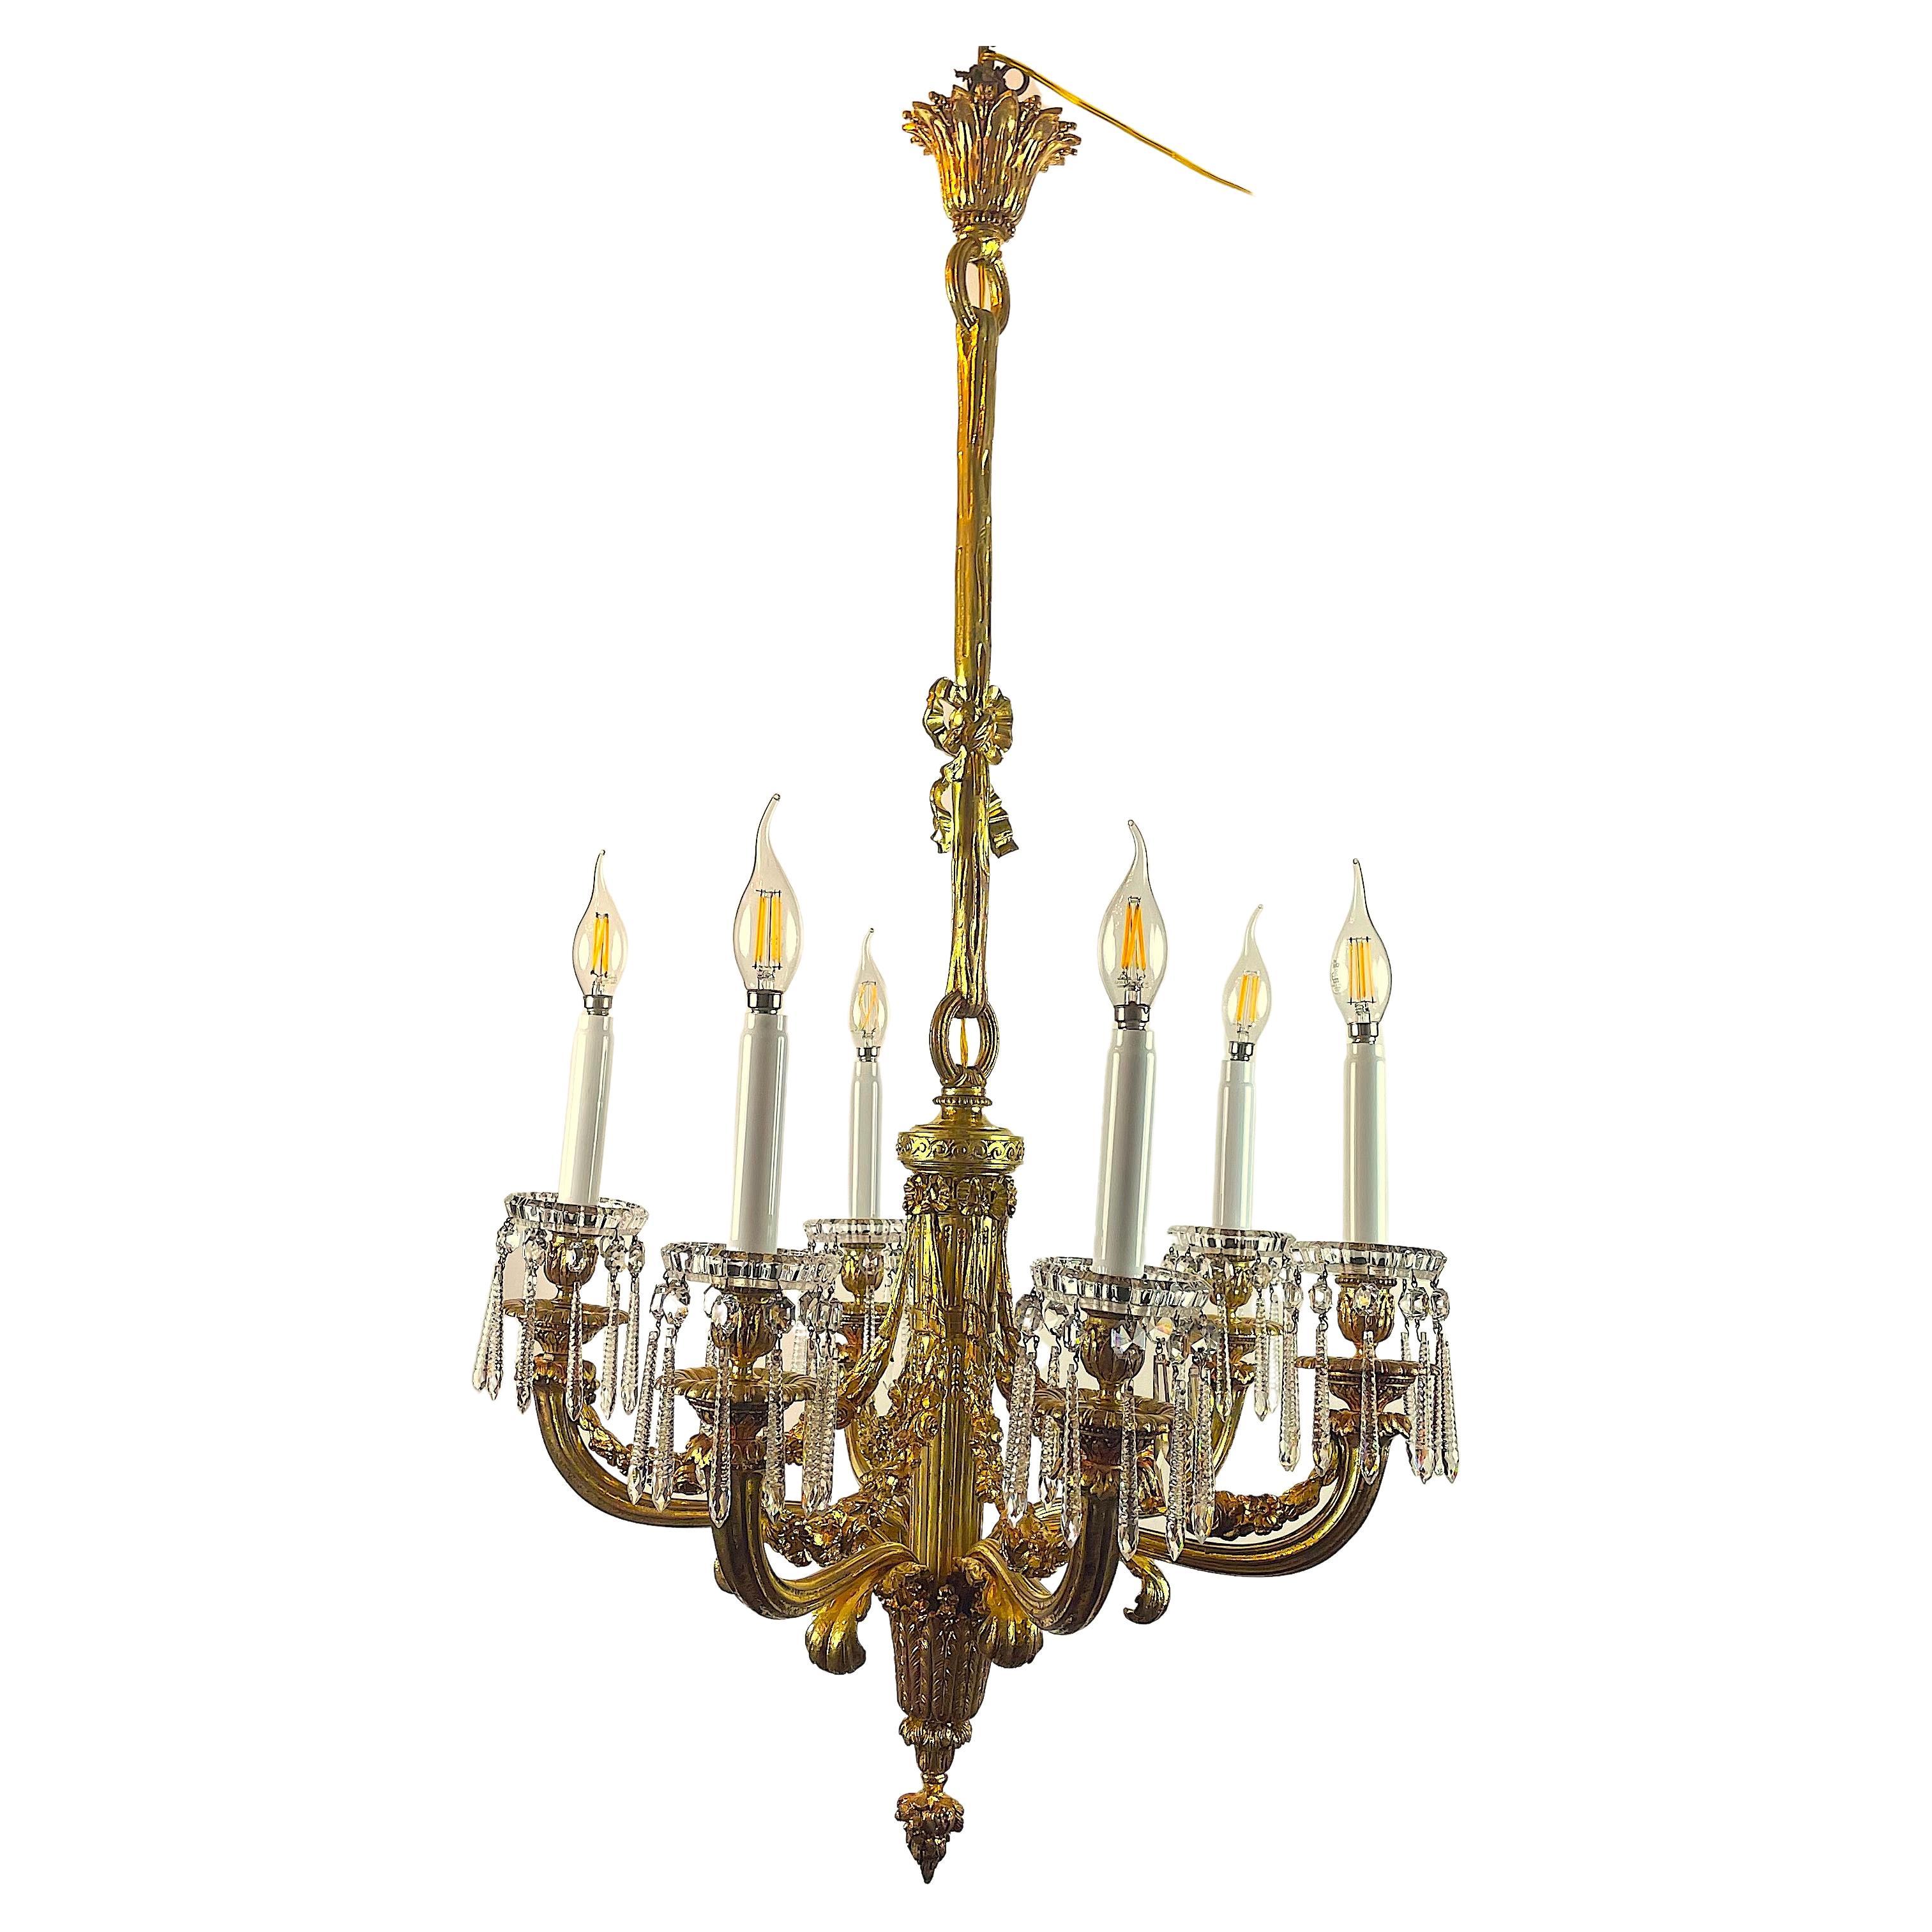 Baccarat Crystal and Ormolu Chandelier French 20th Century Empire Style Pendant 9